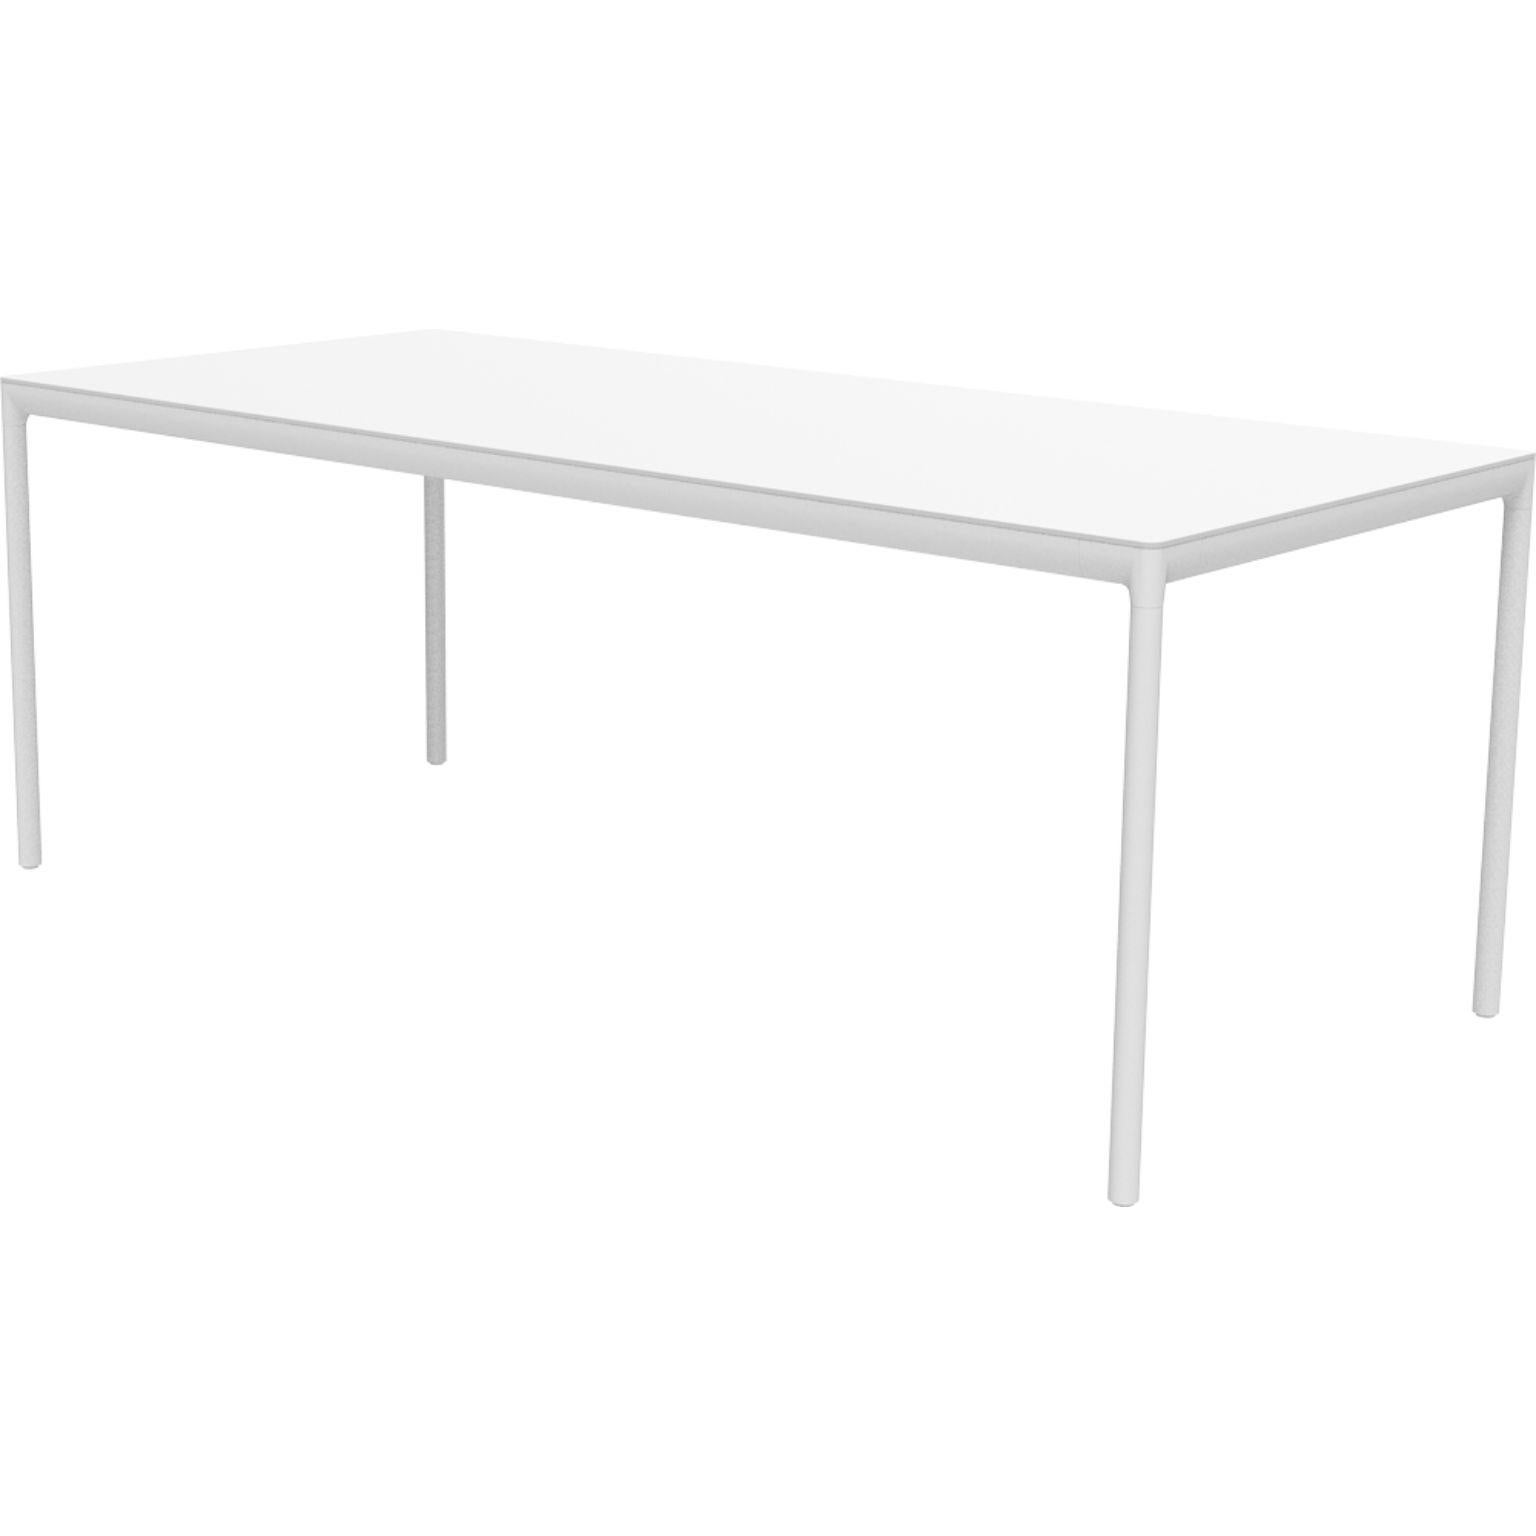 Ribbons white 200 coffee table by MOWEE
Dimensions: D90 x W200 x H75 cm.
Material: Aluminum and HPL top.
Weight: 25 kg.
Also available in different colors and finishes. (HPL Black Edge or Neolith top). 

An unmistakable collection for its